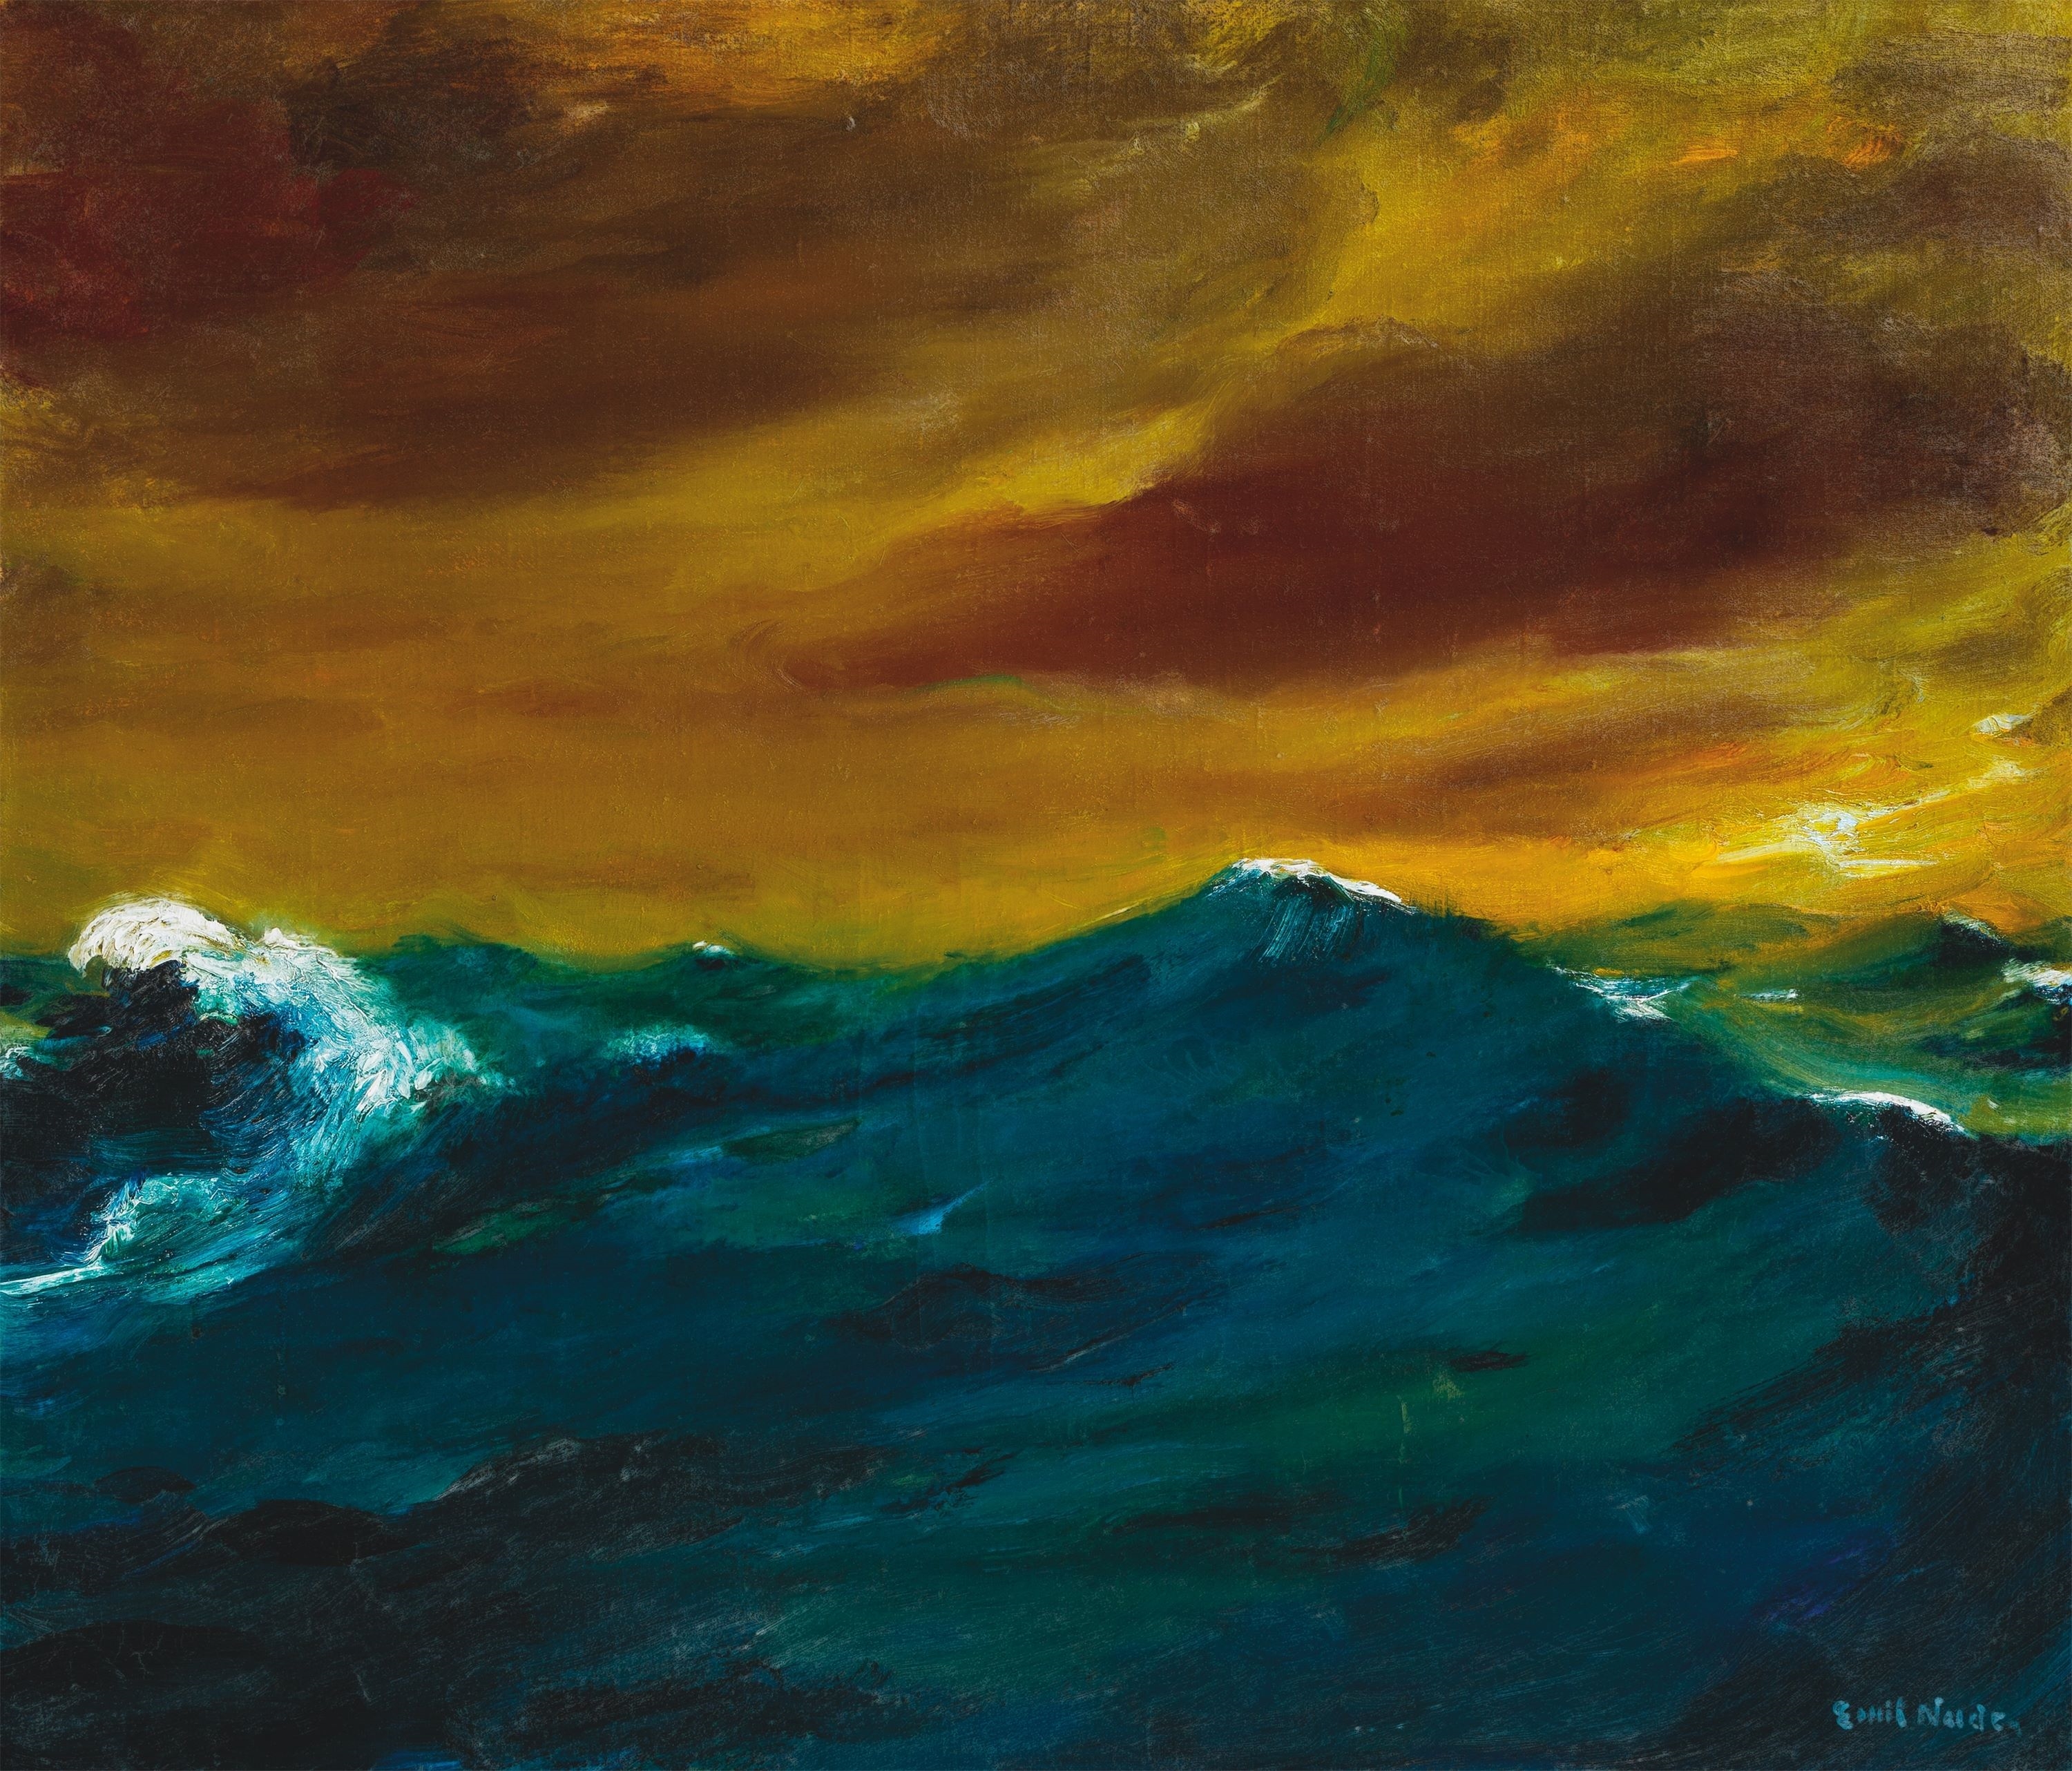 ”Hohe See”. by Emil Nolde, 1939